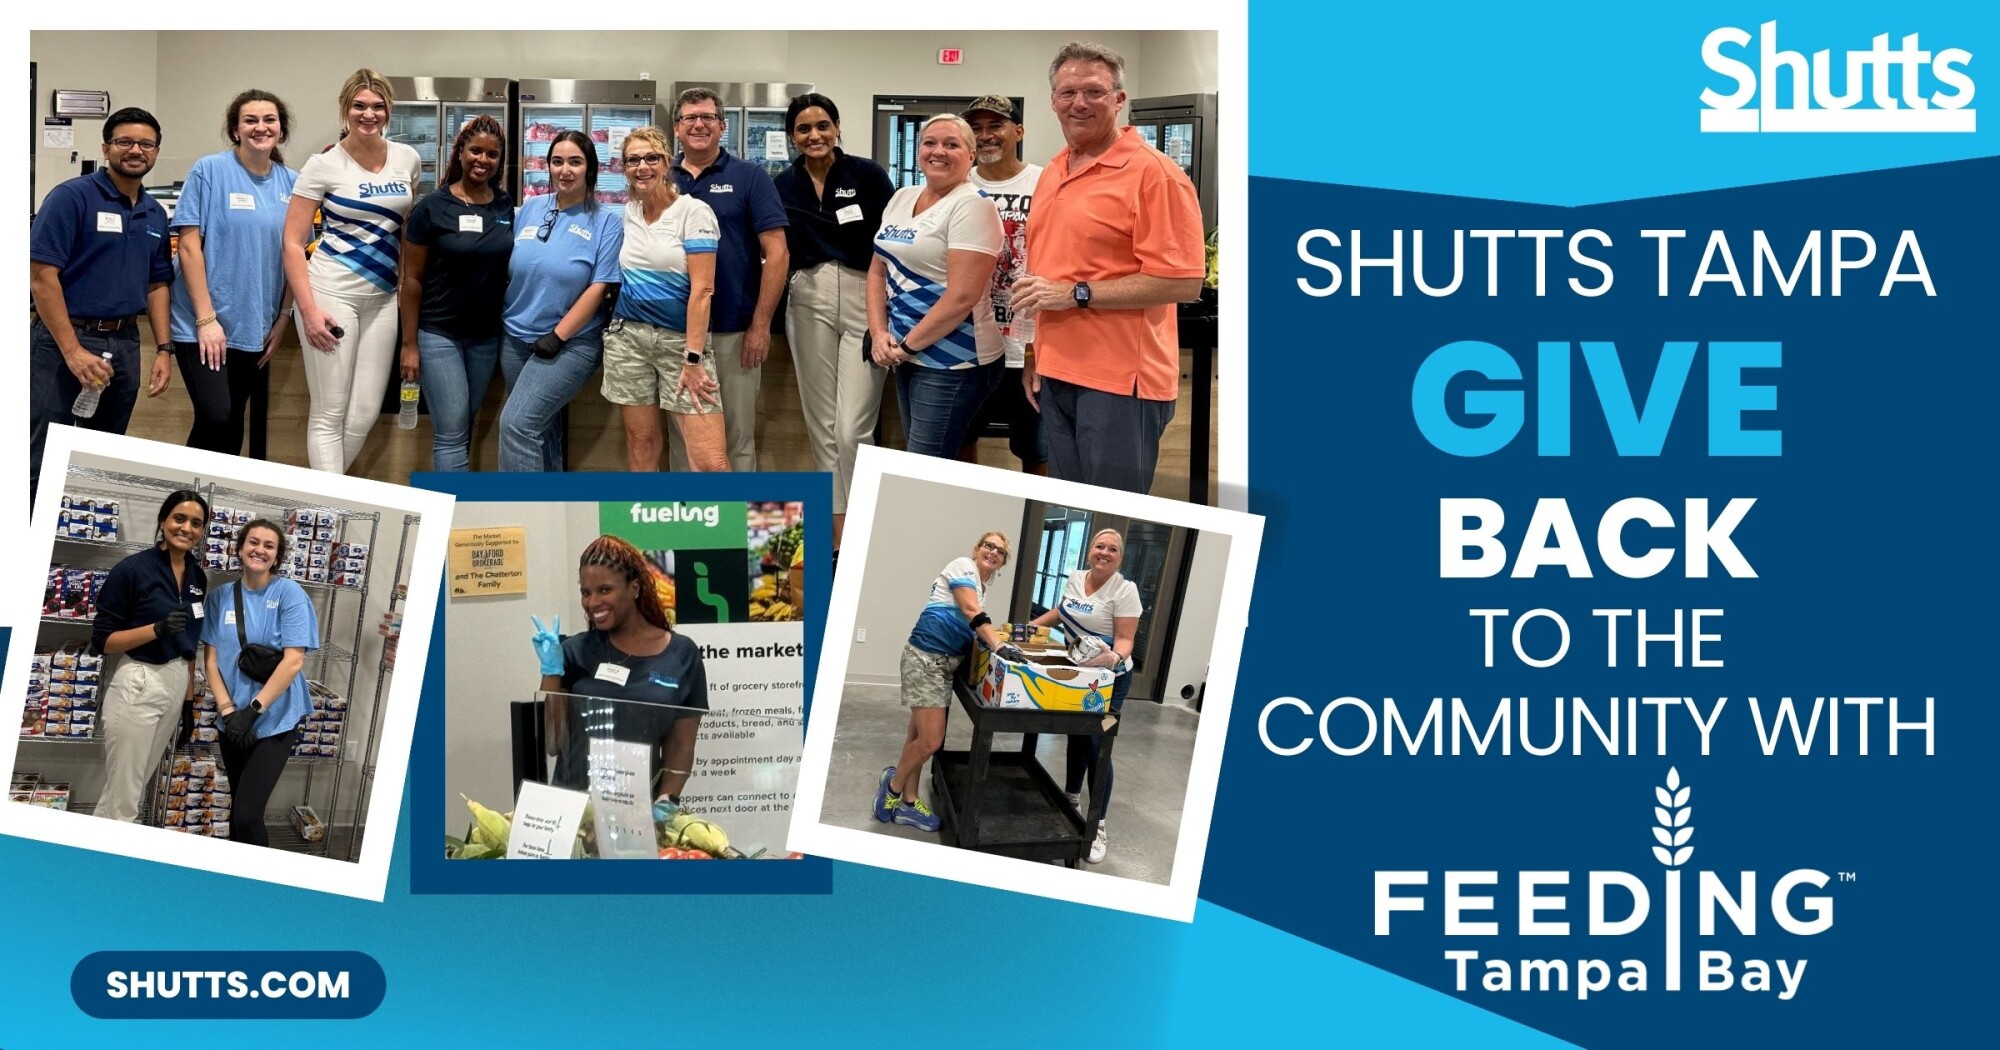 Shutts Tampa Give Back to the Community with Feeding Tampa Bay